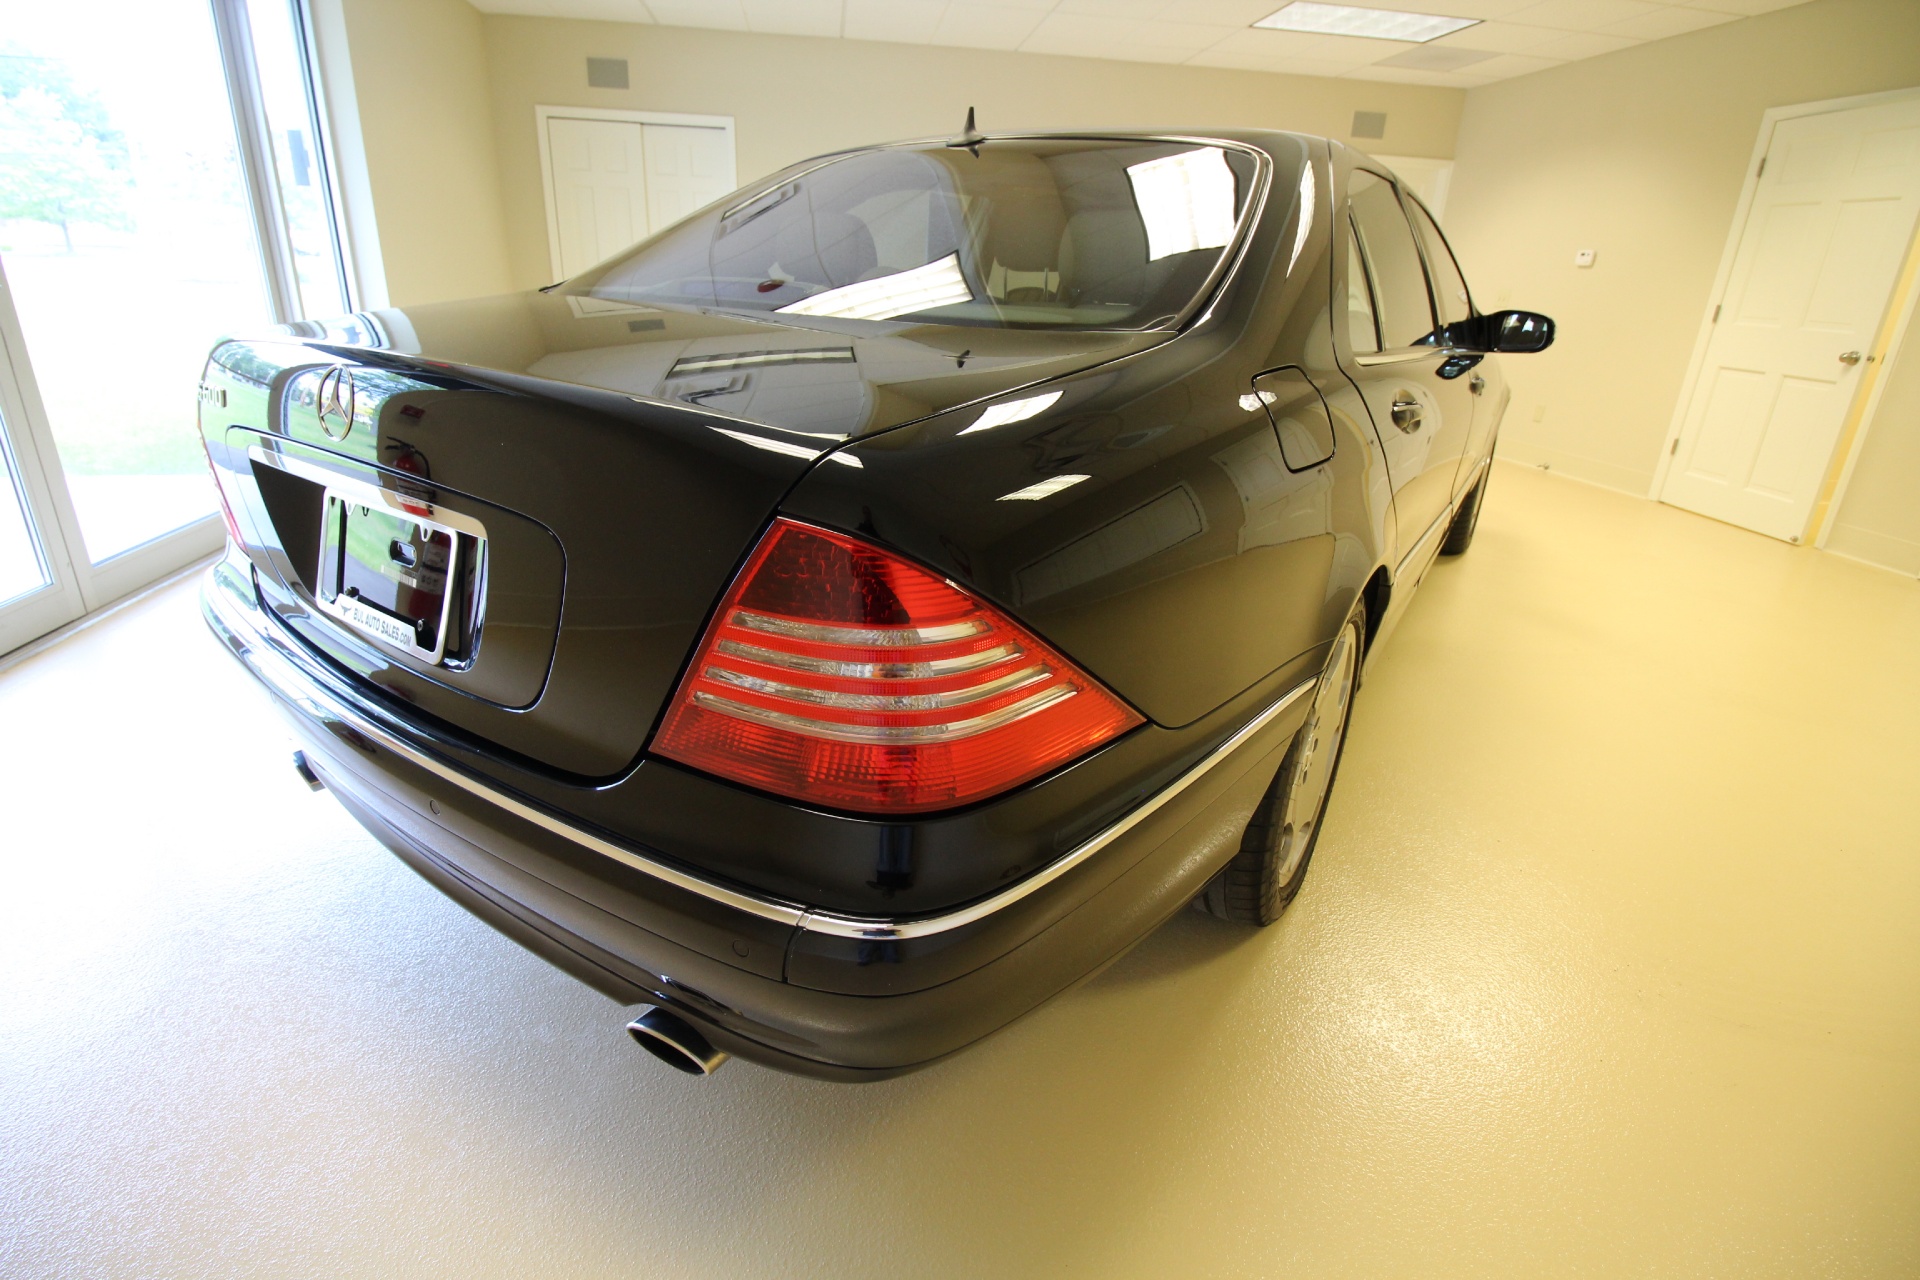 Used 2004 Black Mercedes-Benz S-Class S600 SUPERB CONDITION,LOW MILES | Albany, NY